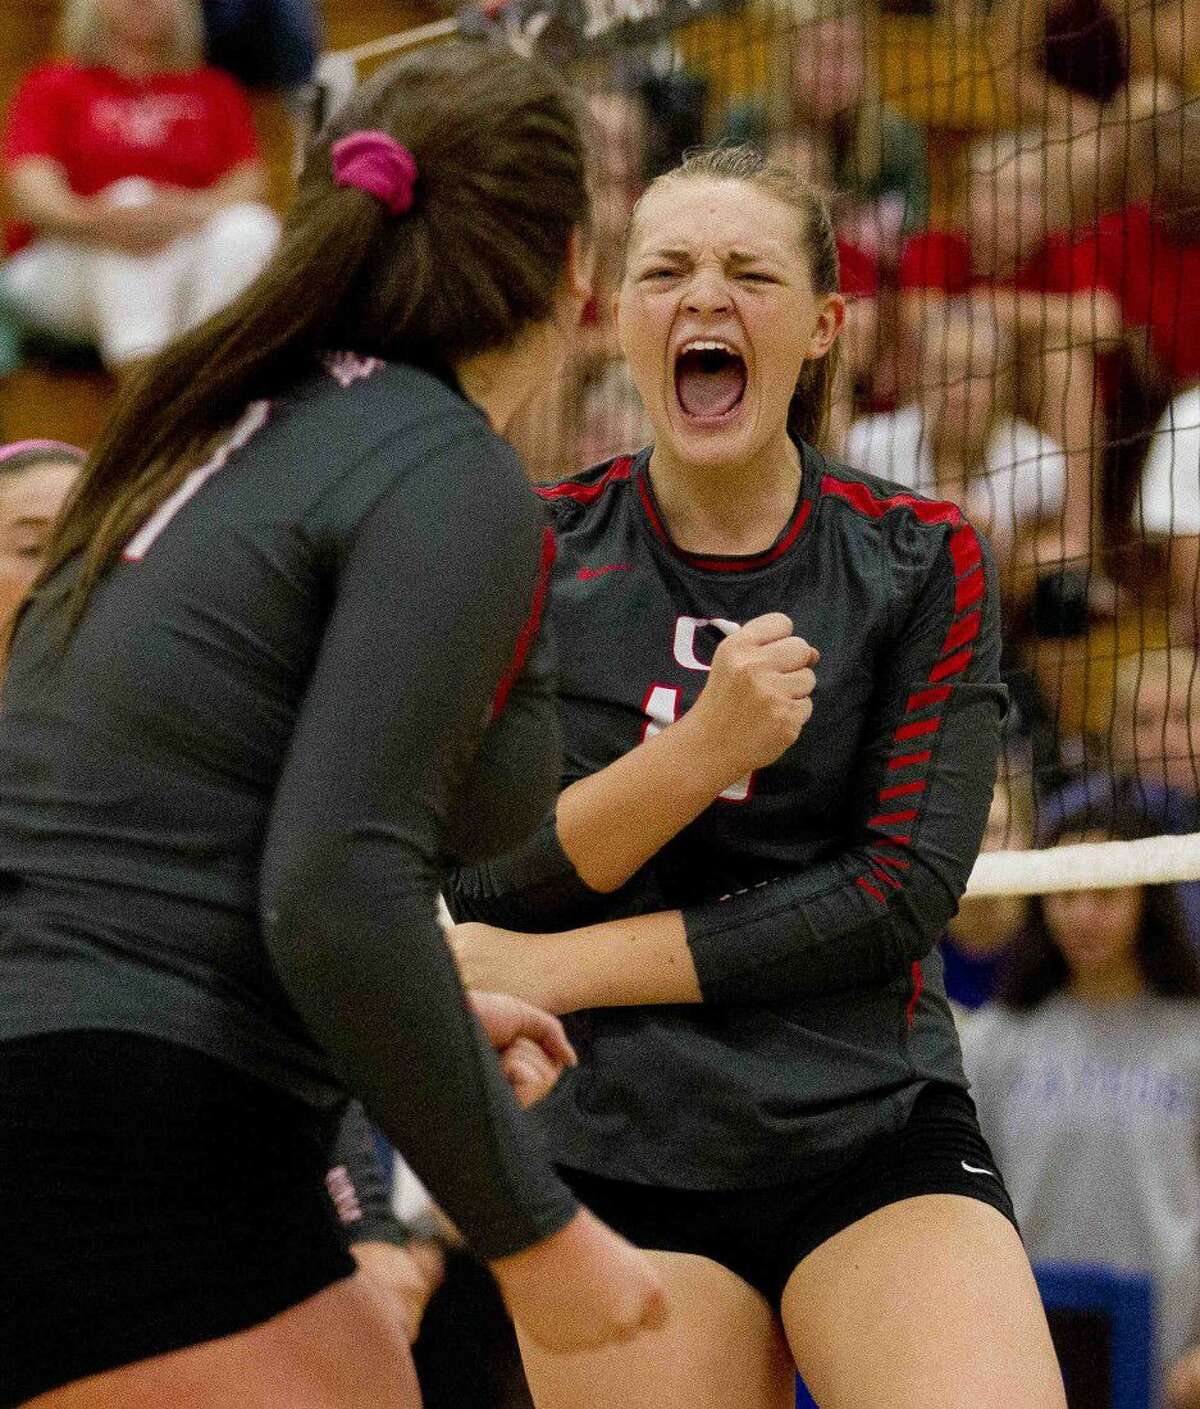 Oak Ridge's Hailey Lohnes celebrates a point in the first set of a gold bracket semifinal volleyball match during the Katy/Cy-Fair Nike Invitational. Go to HCNpics.com to purchase this photo and others like it.